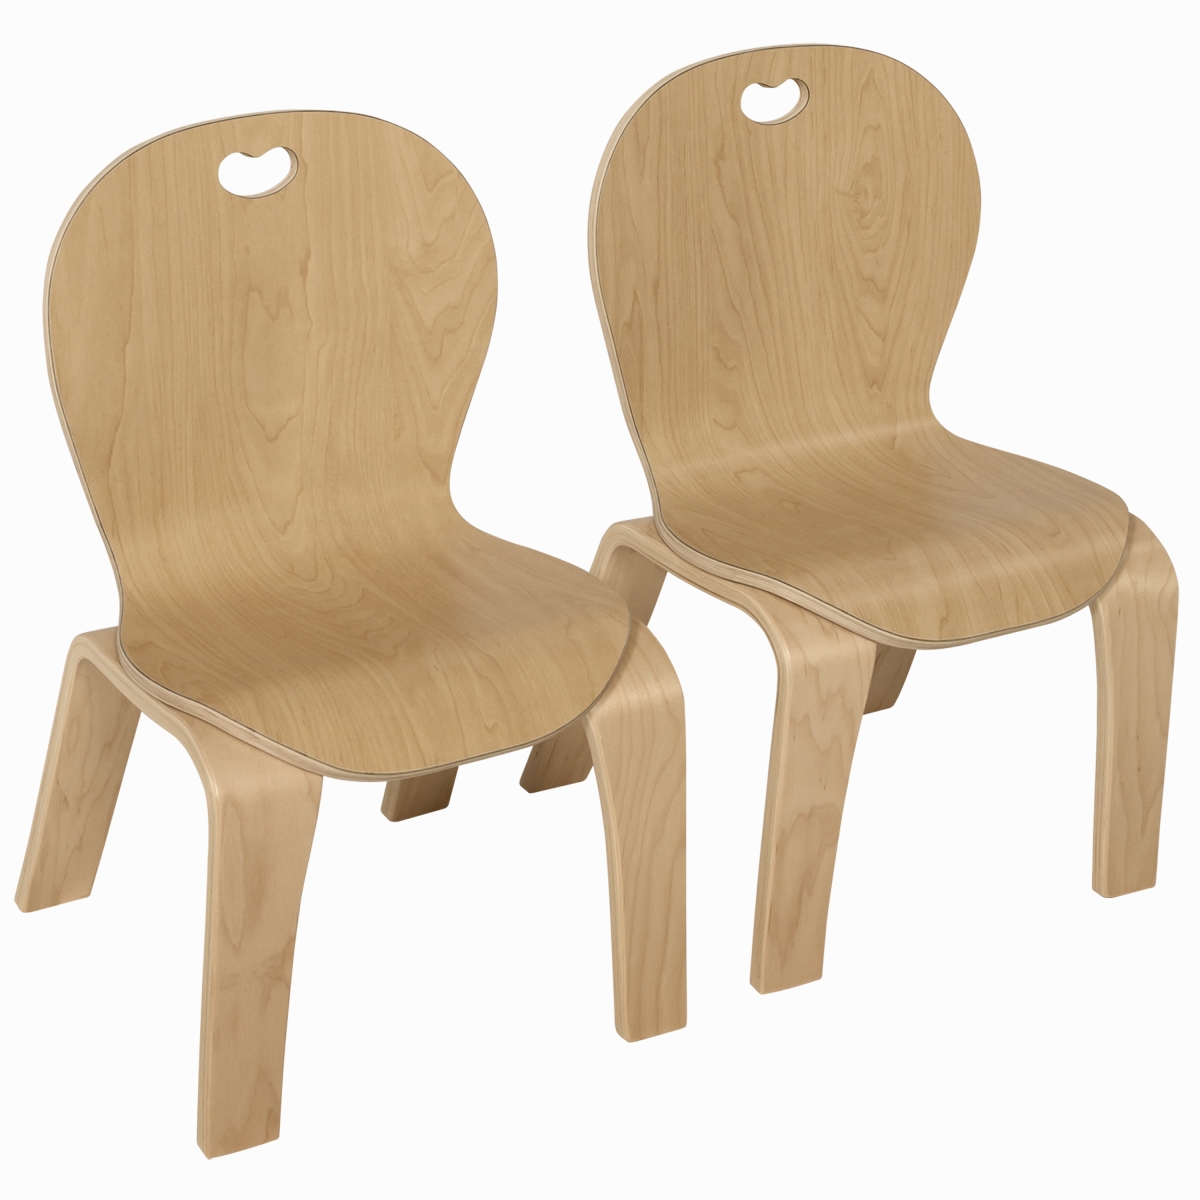 Mh881802 18 In. Bentwood Kids Chair - Set Of 2